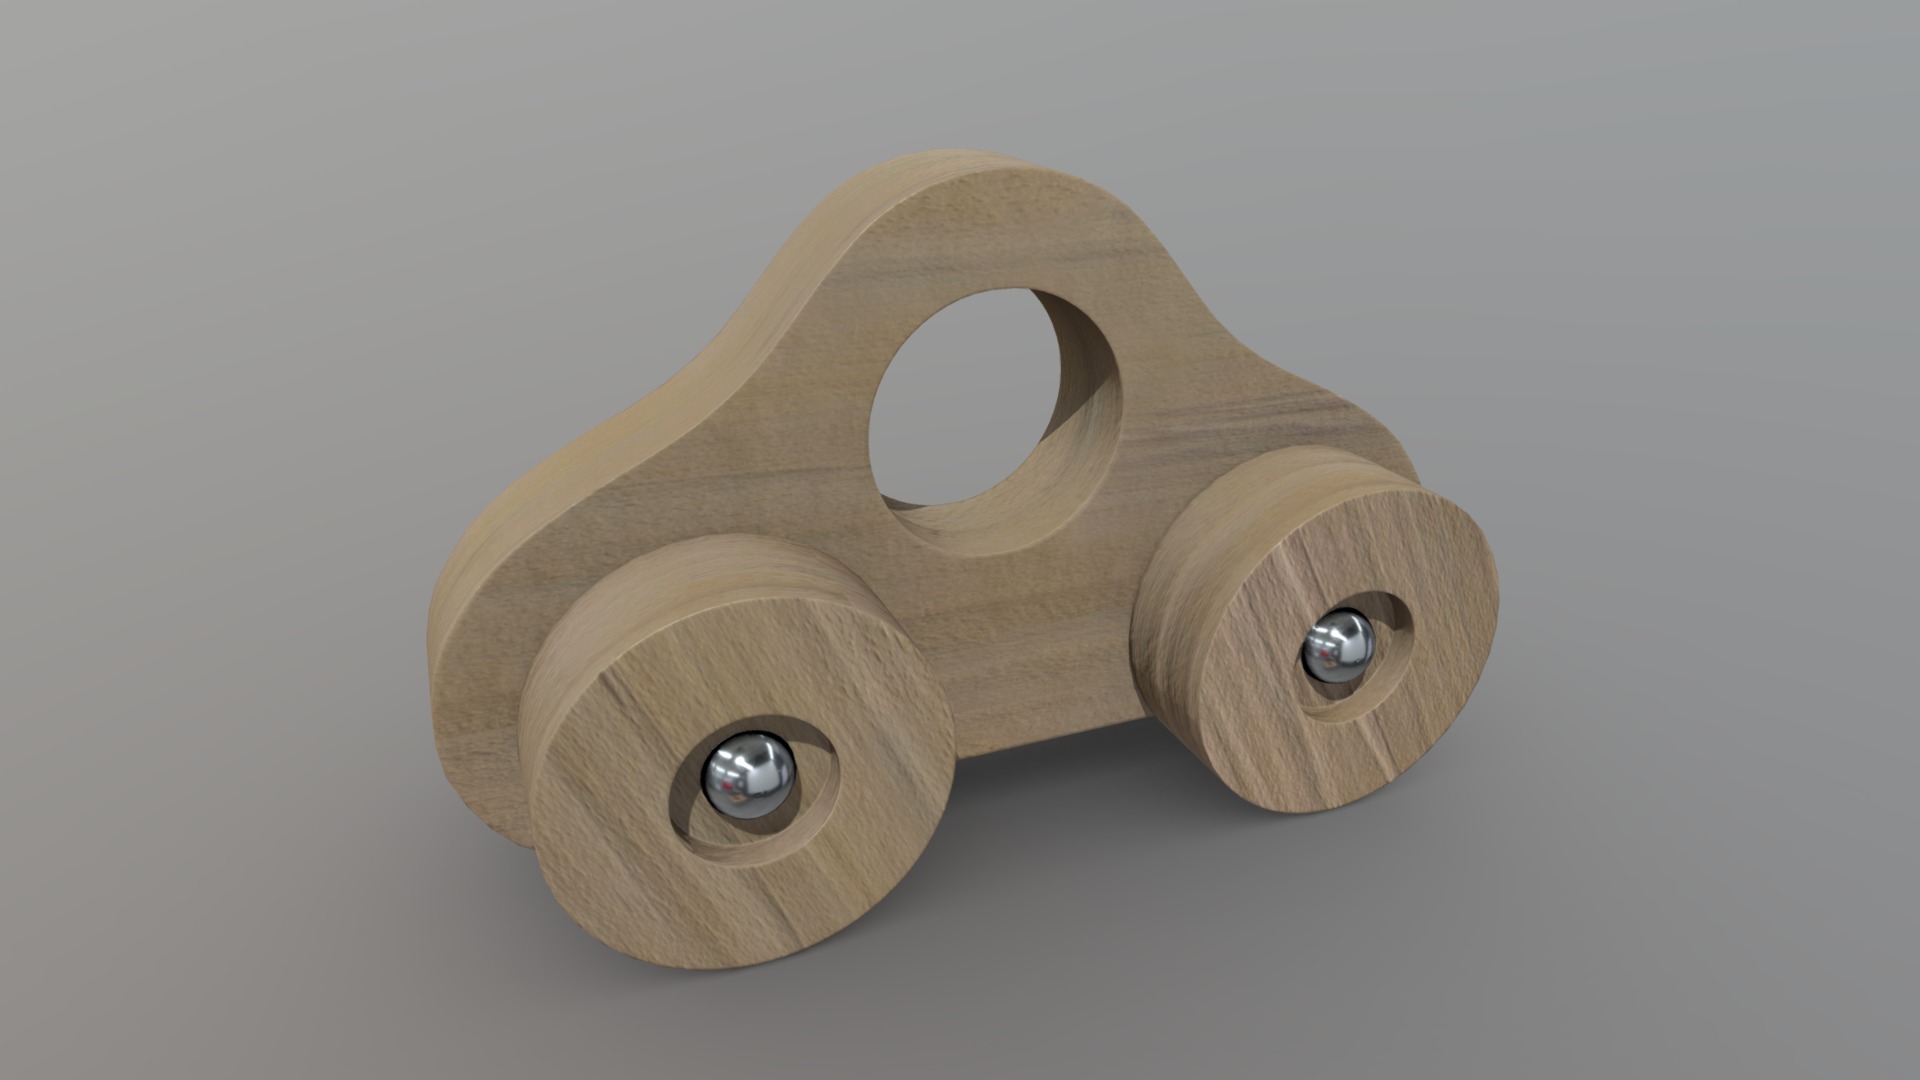 3D model Wooden Car Toy - This is a 3D model of the Wooden Car Toy. The 3D model is about a roll of toilet paper.